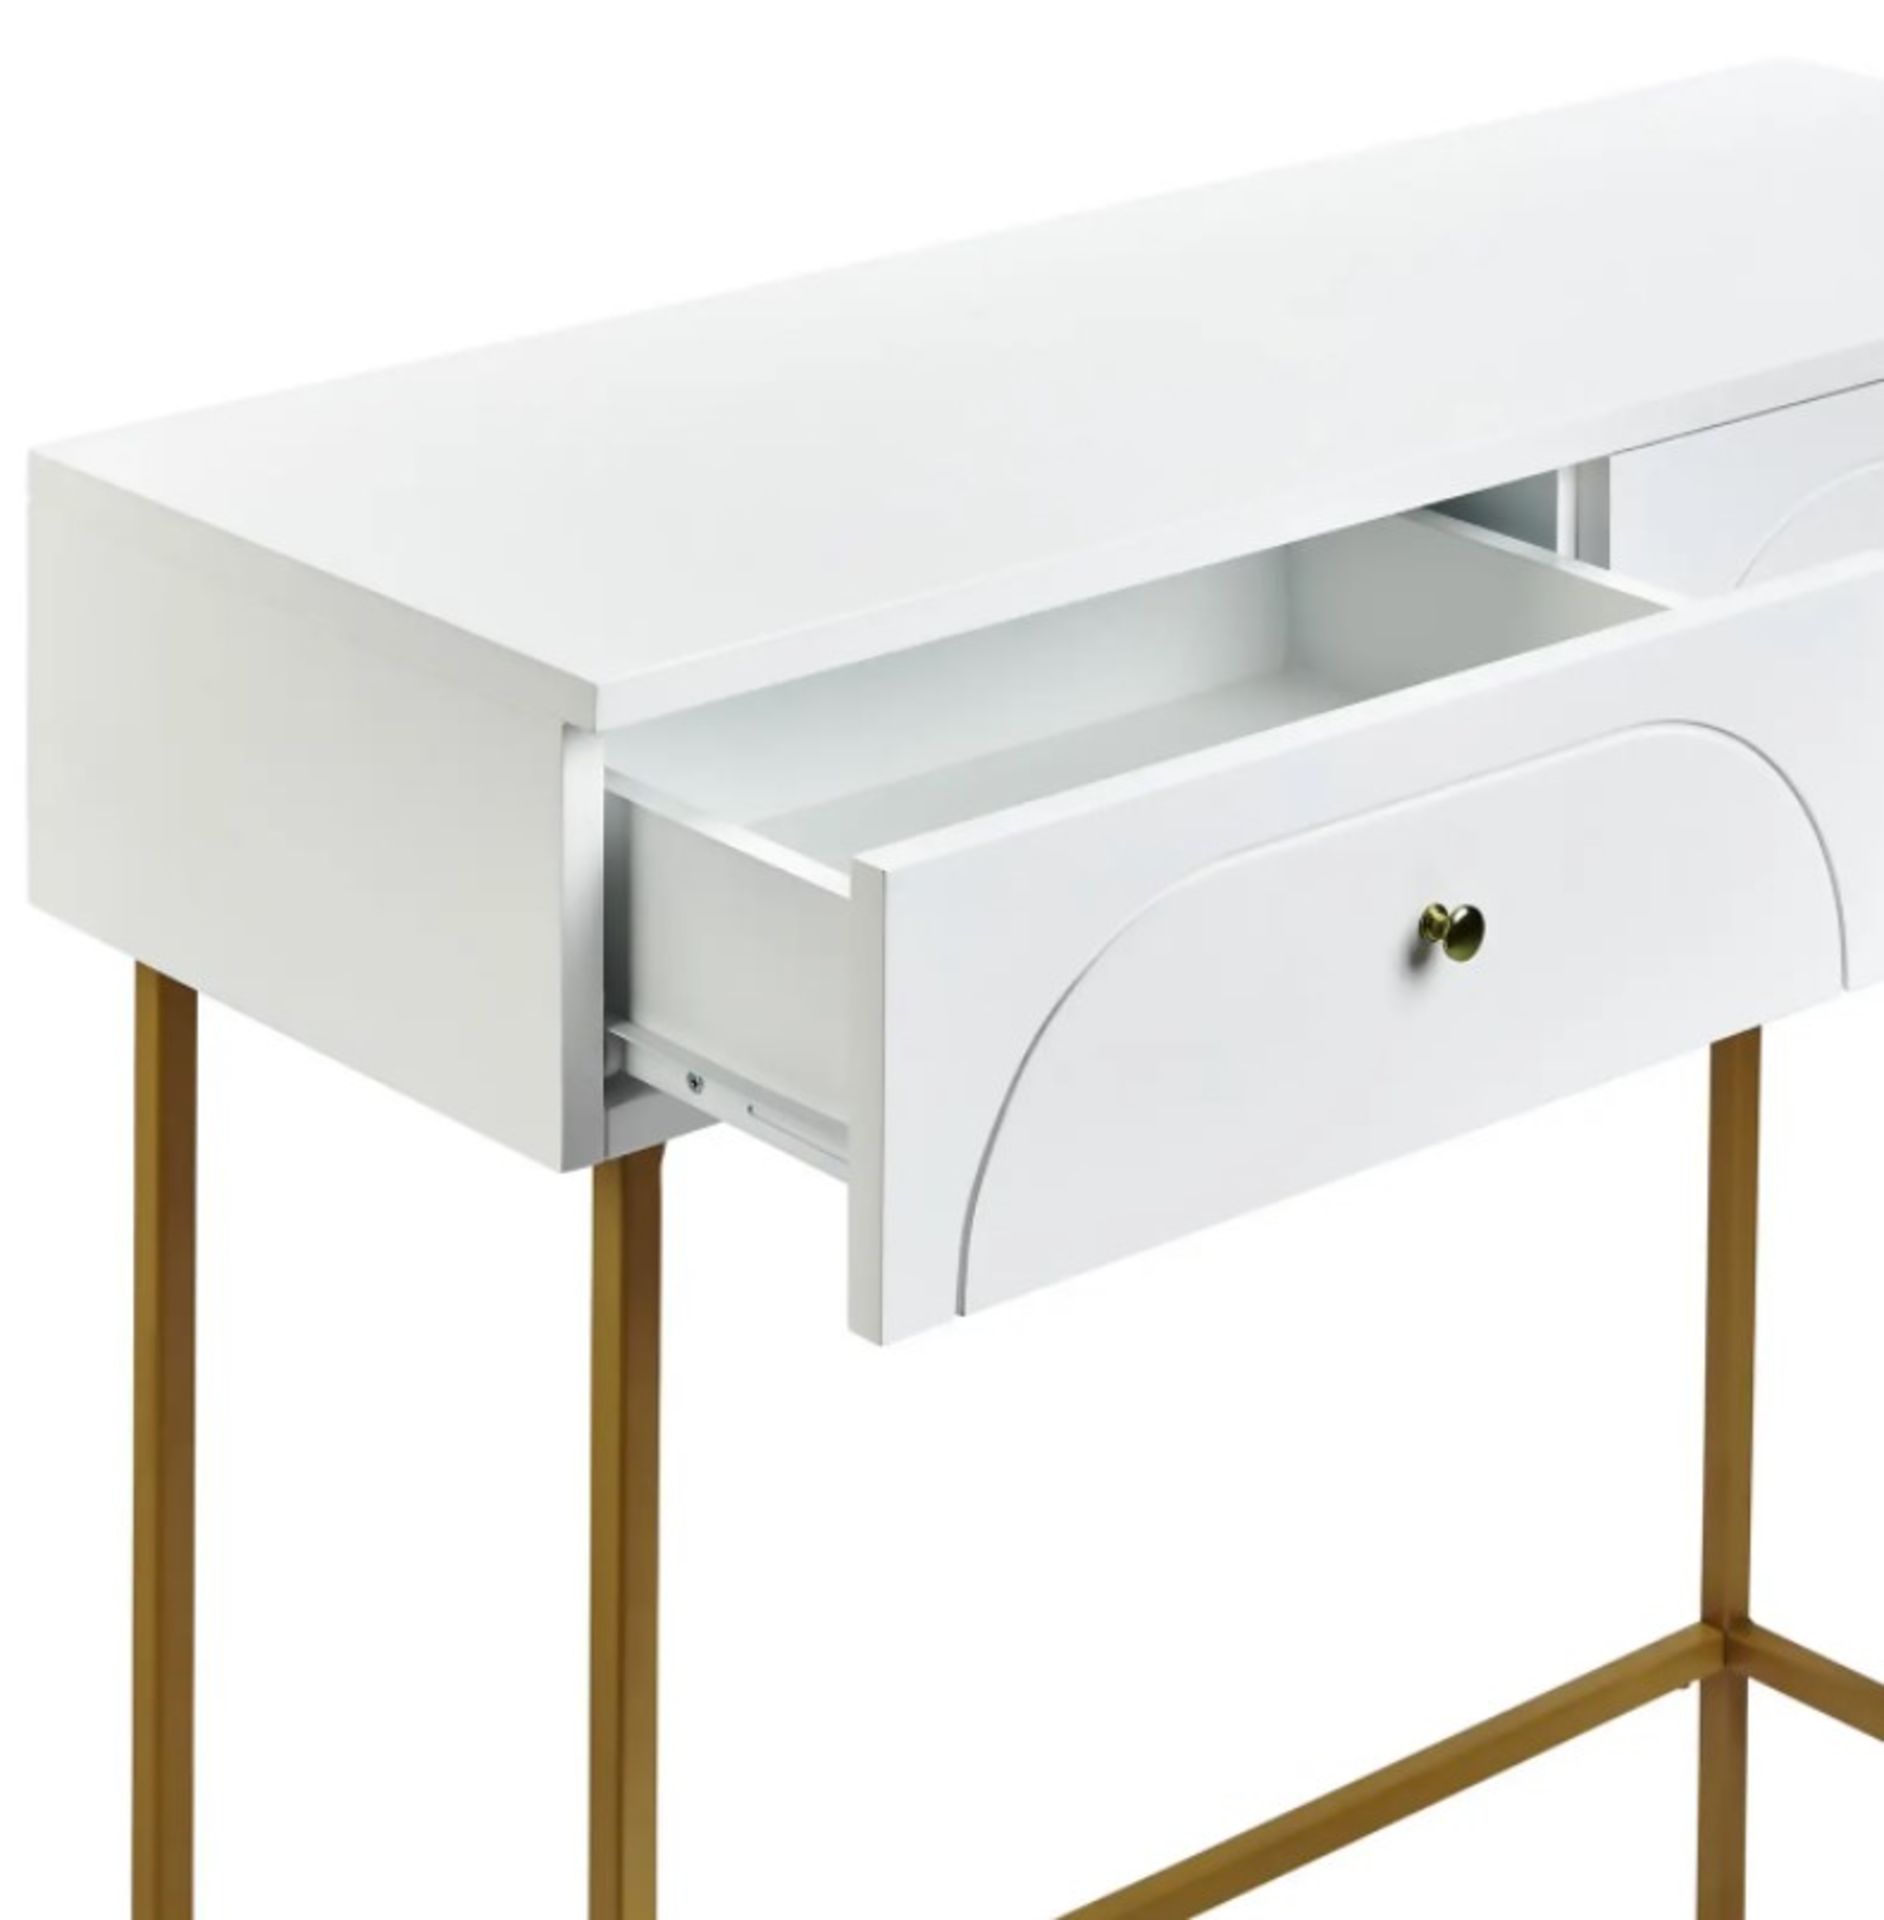 (Mz) 1x House Beautiful Taylor 2 Drawer Console Desk White RRP £99. White Gloss Finish. Gold Effec - Image 4 of 5